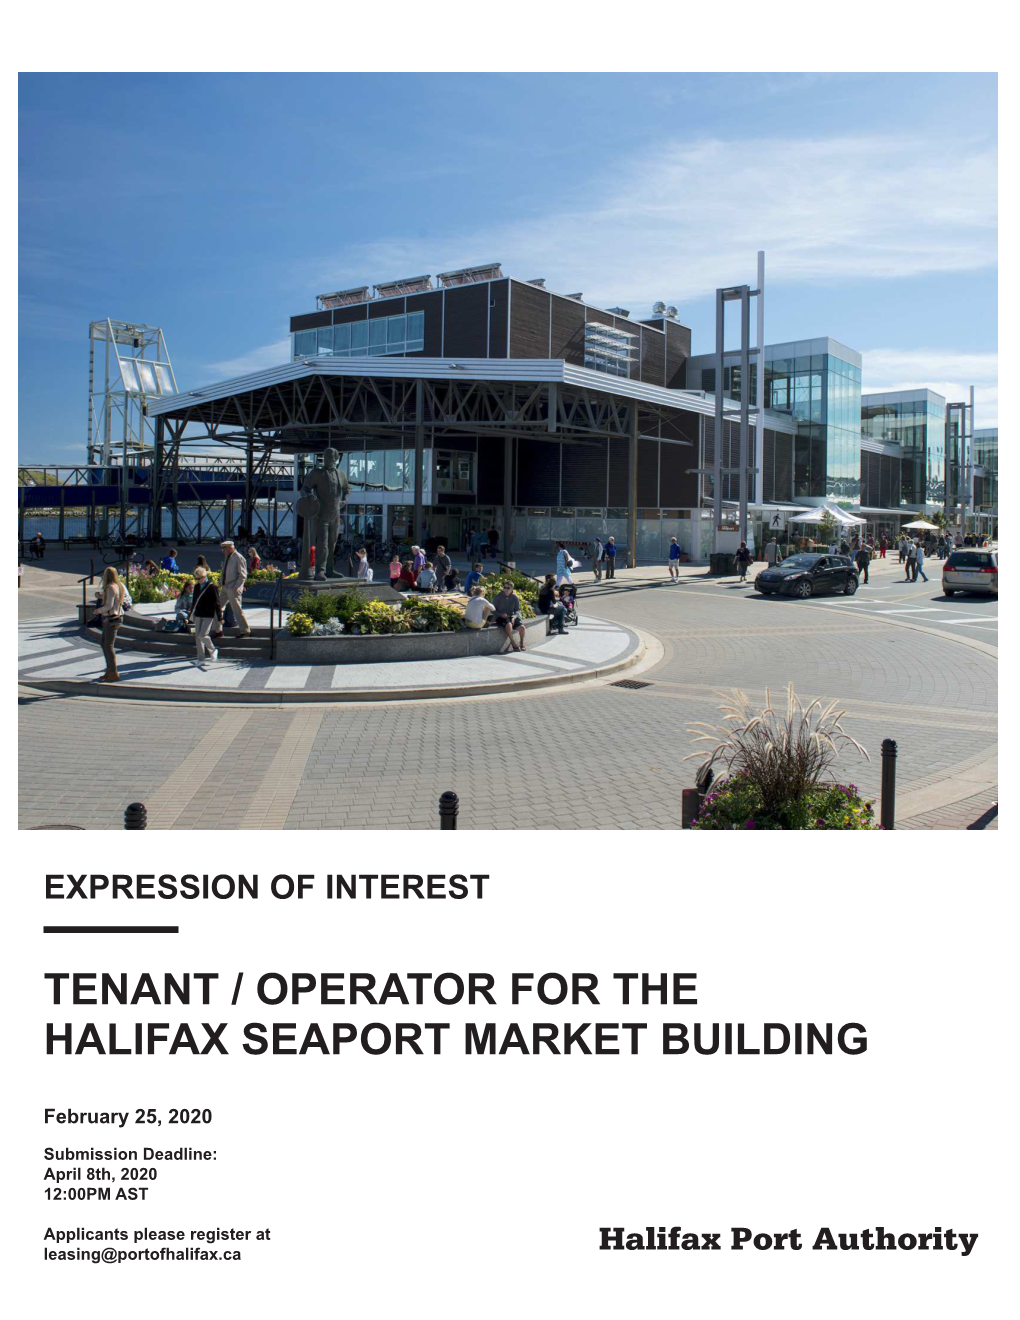 Tenant / Operator for the Halifax Seaport Market Building